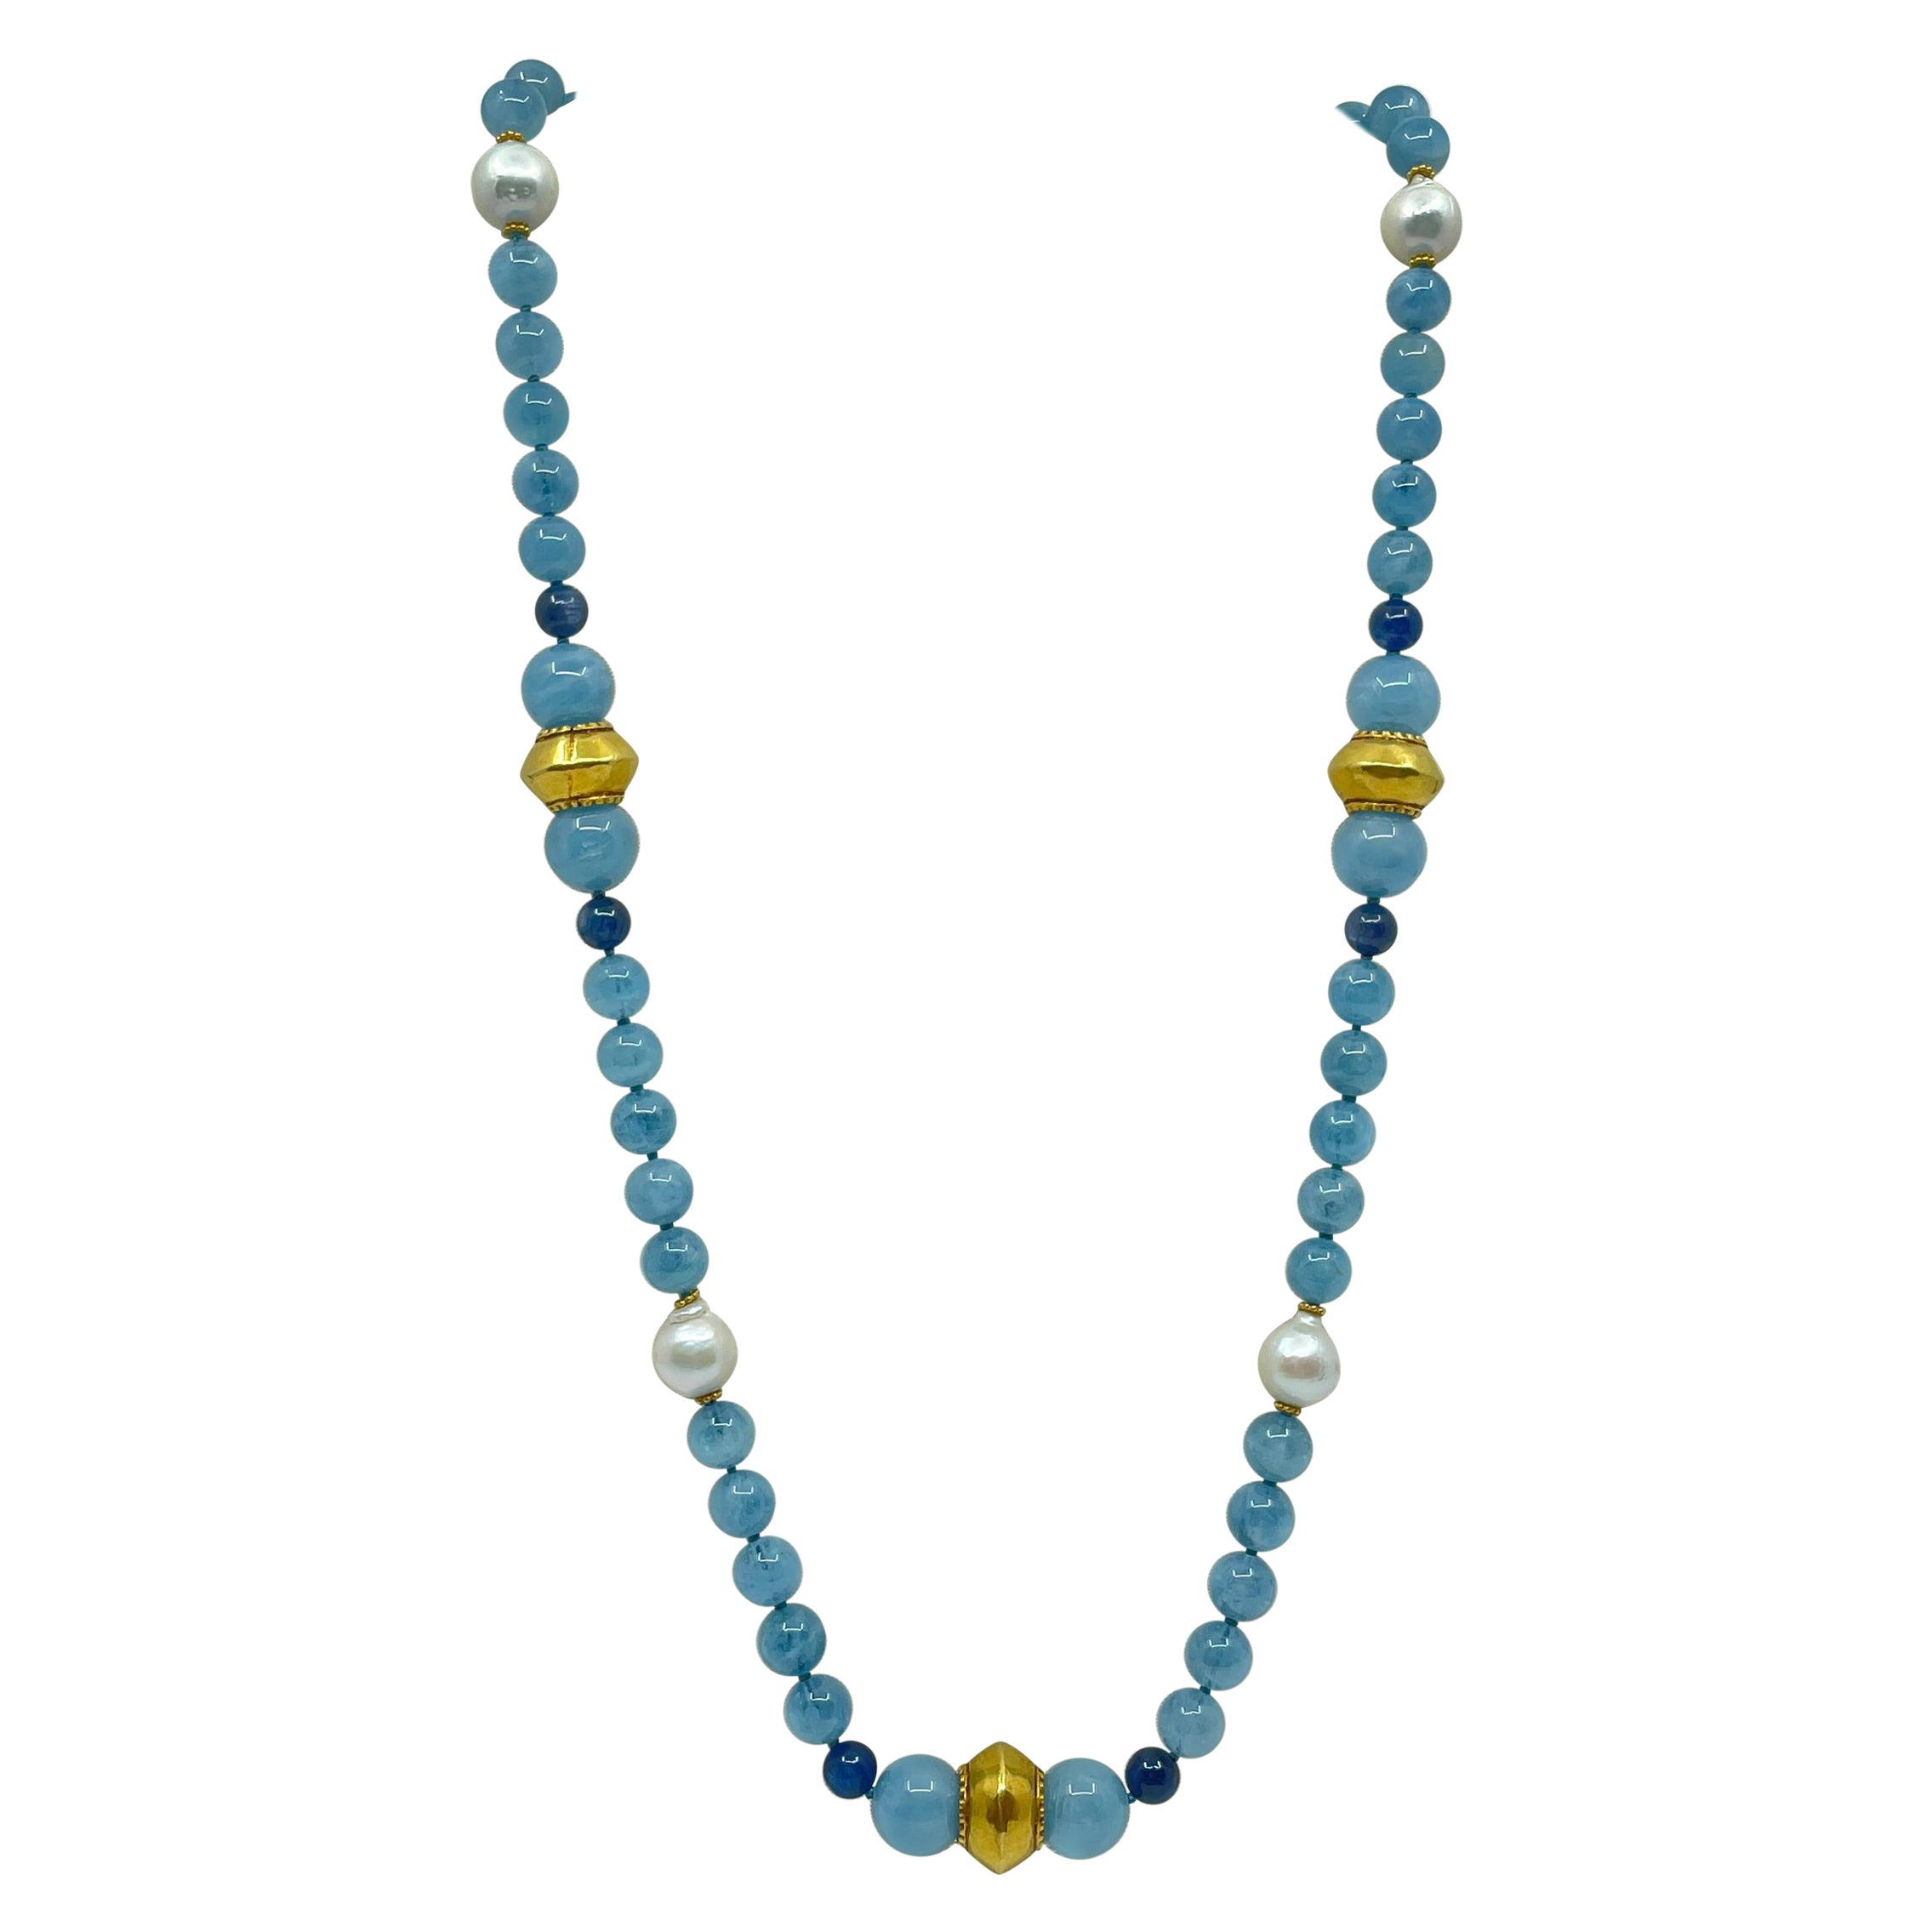 Necklace with Aquamarine, Kyanite, South Sea Pearls, Gold & 18K Gold For Sale